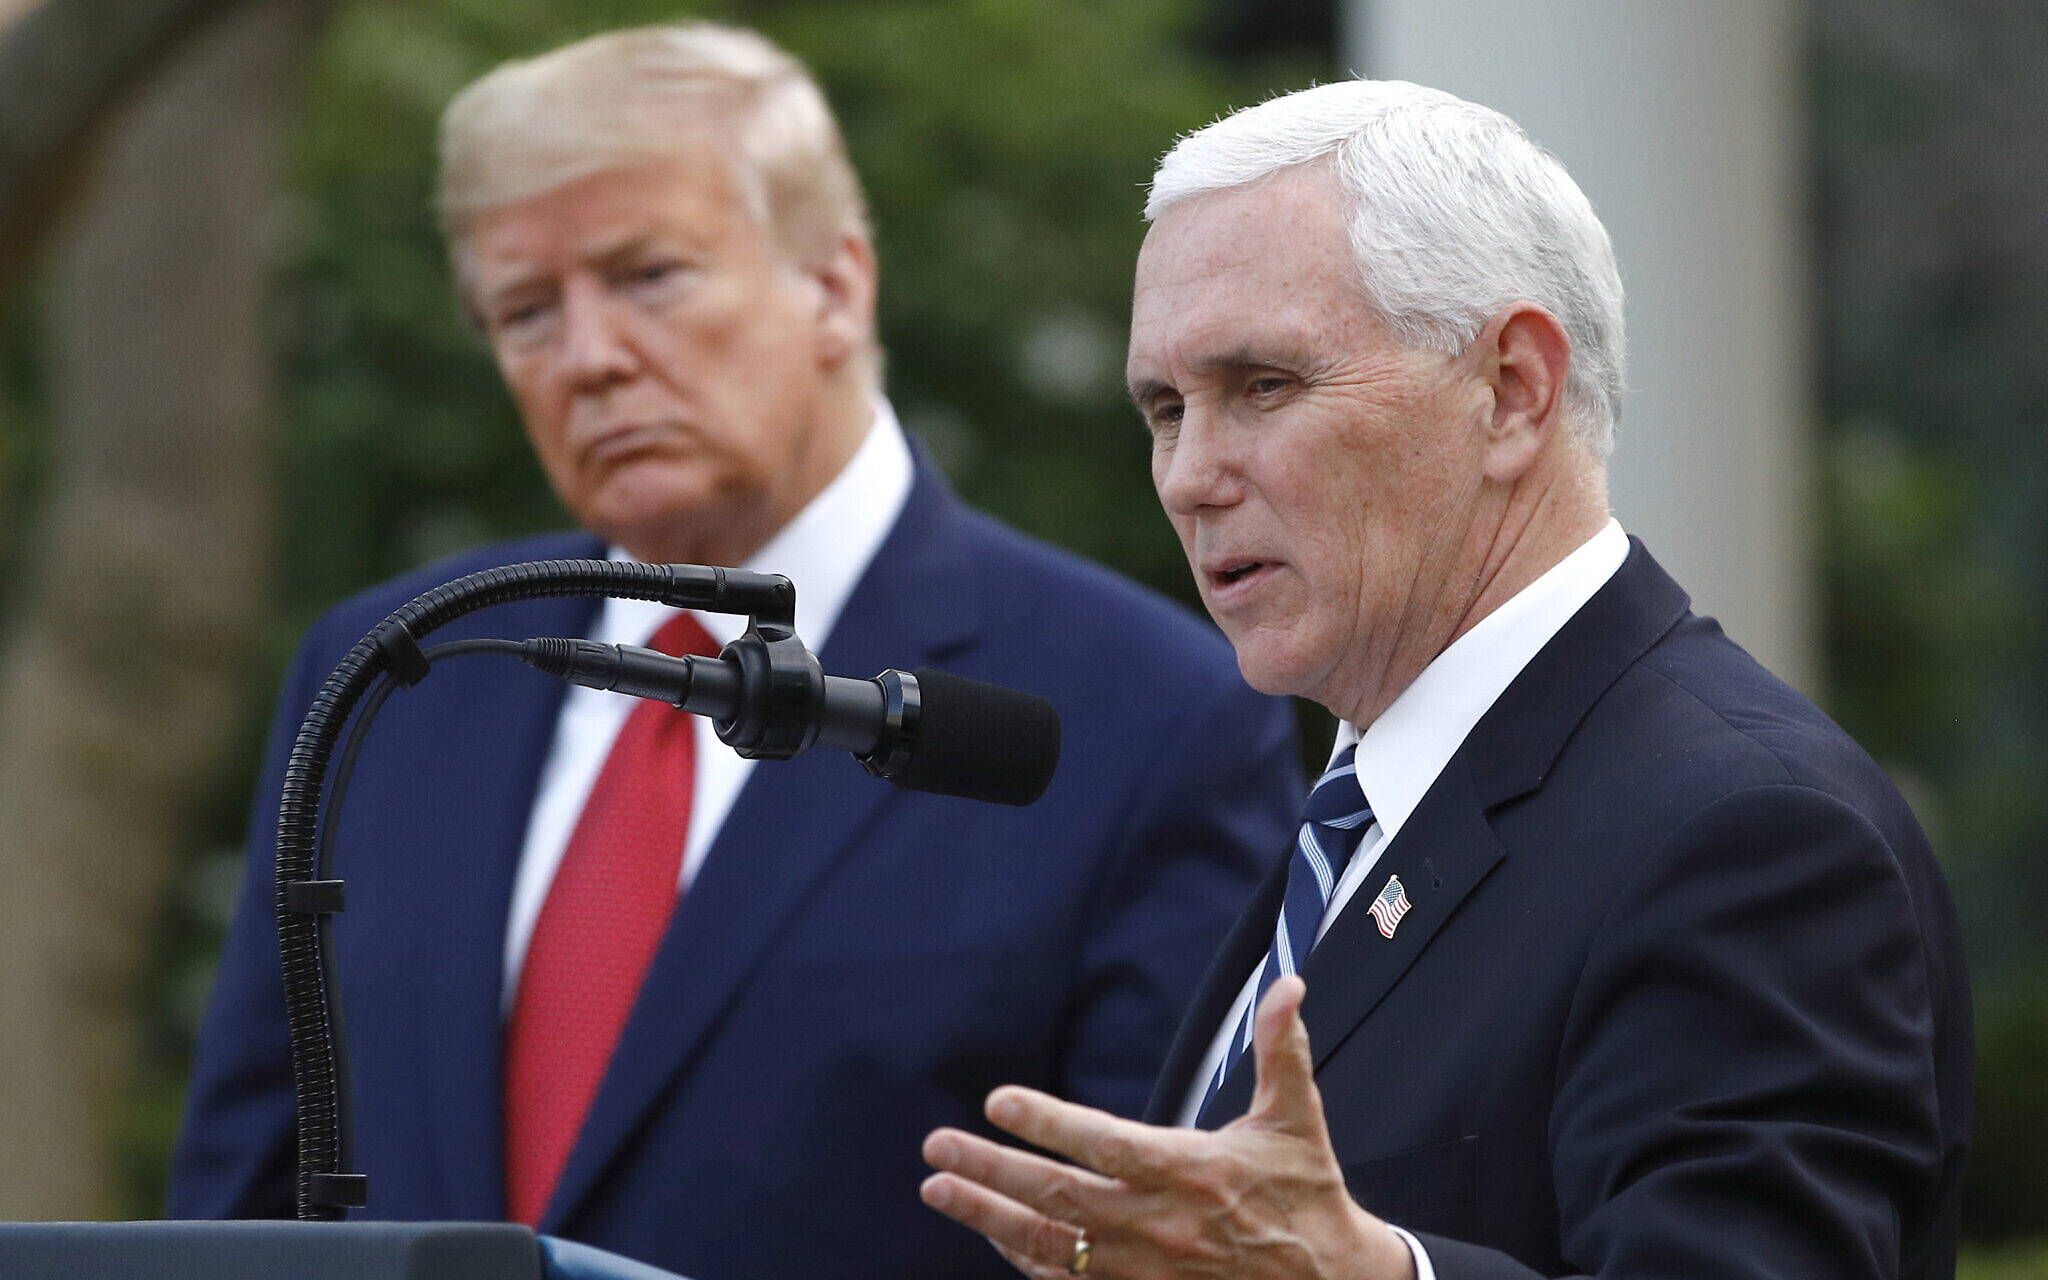 Pence's refusal to endorse Trump signals a widening rift (Credits: The Times of Israel)